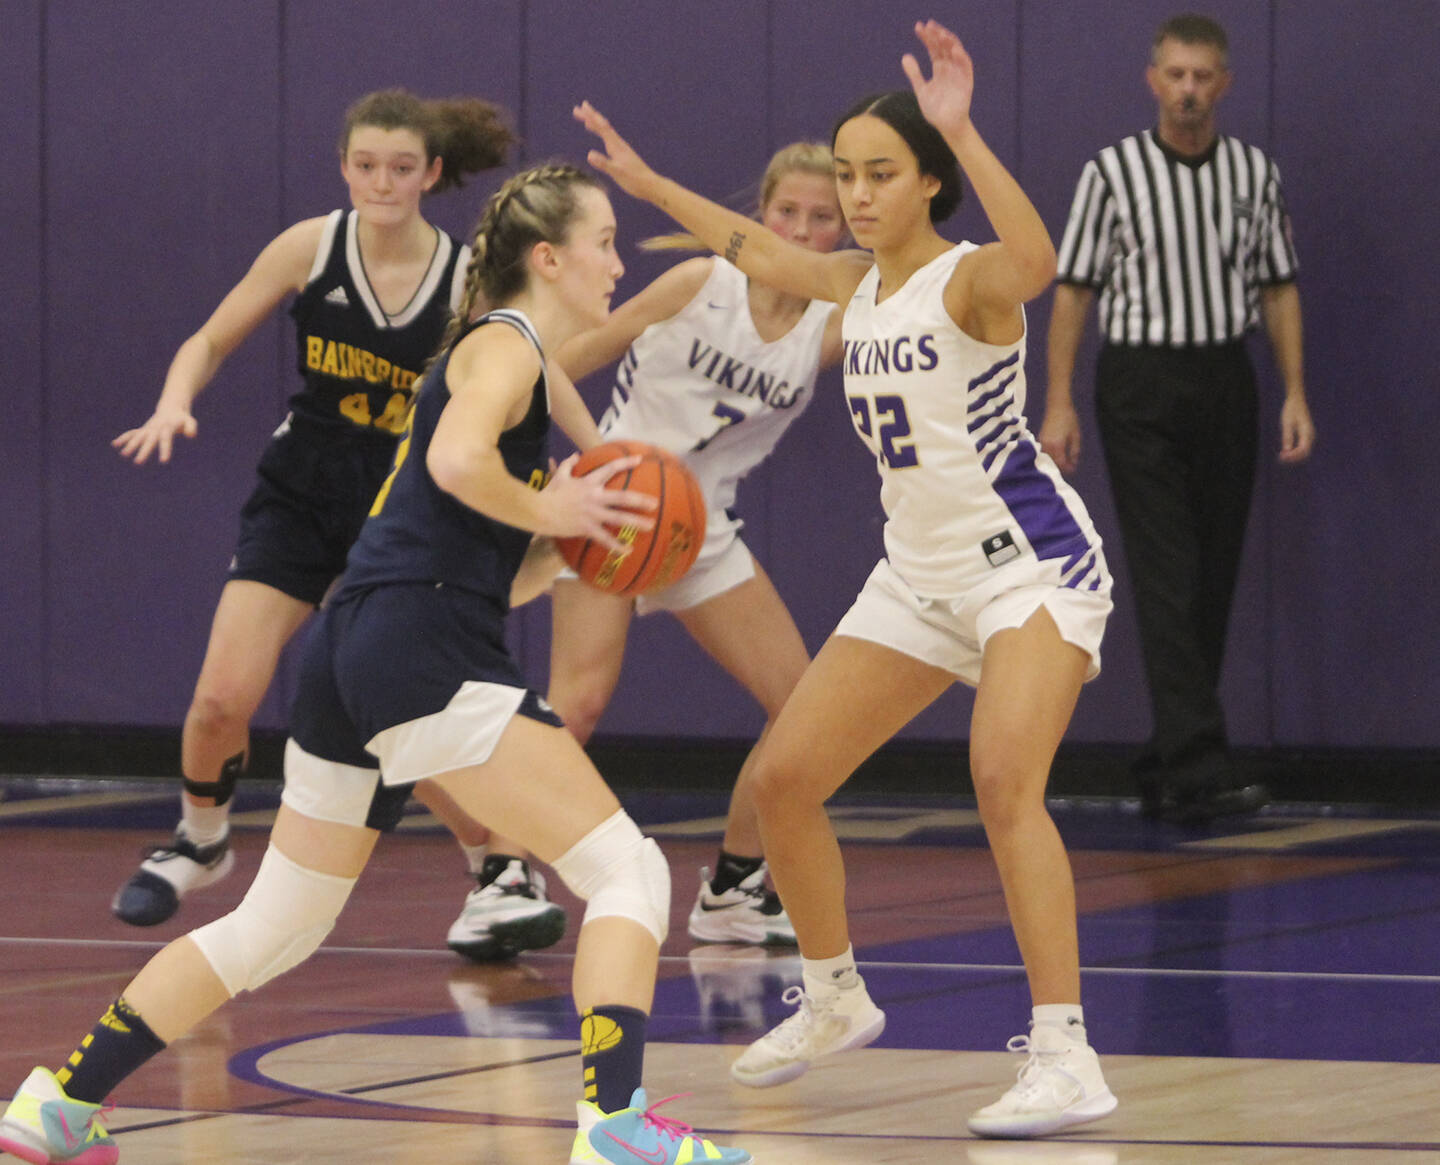 Grace Colburn (20) of Bainbridge drives to the hoop with Ayanna Selembo of NK defending.